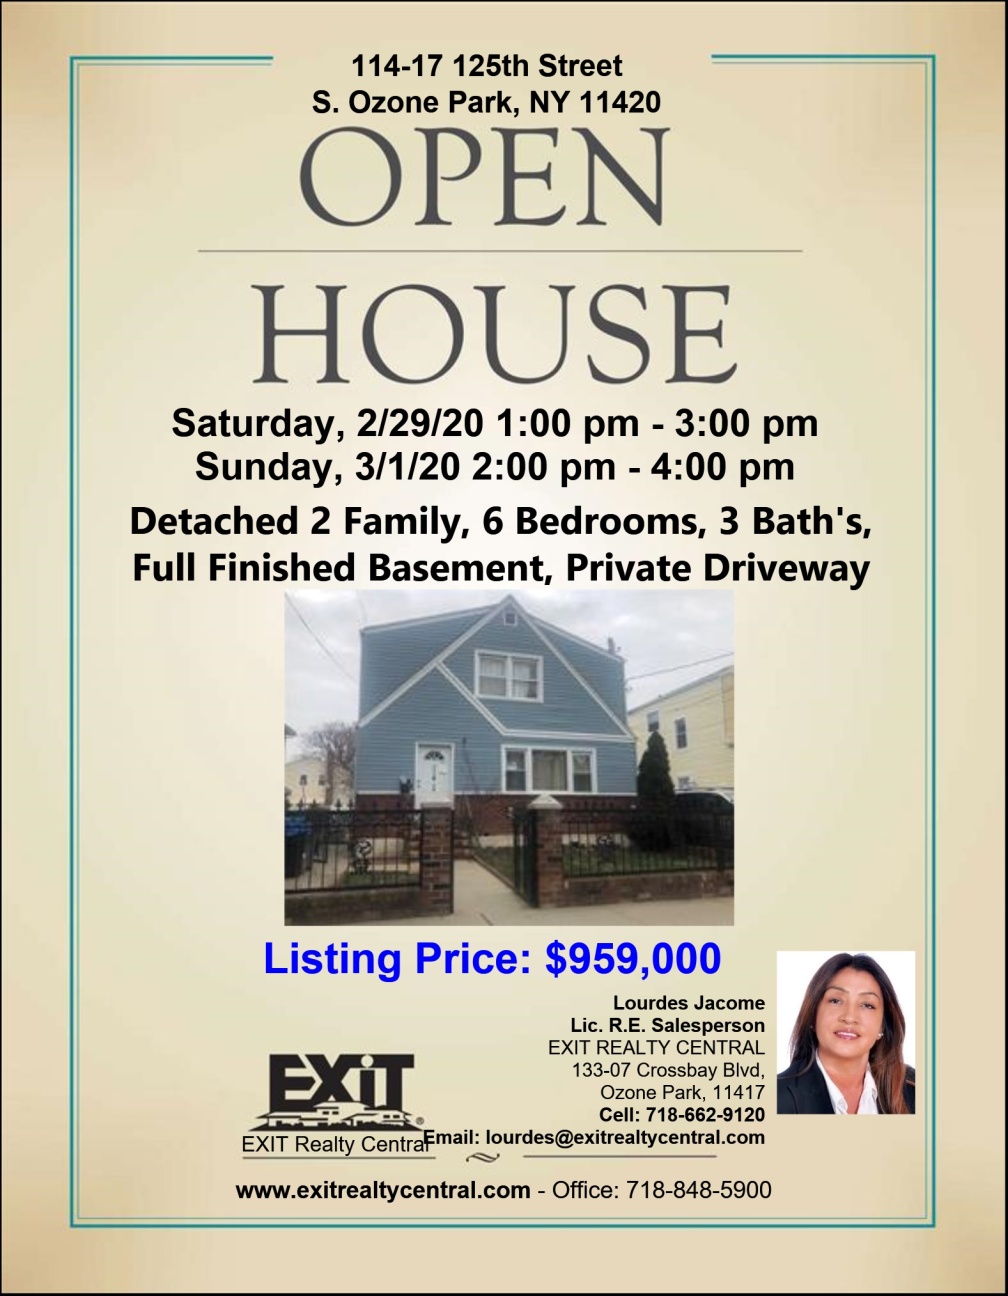 Open House in S. Ozone Park 2/29 & 3/1